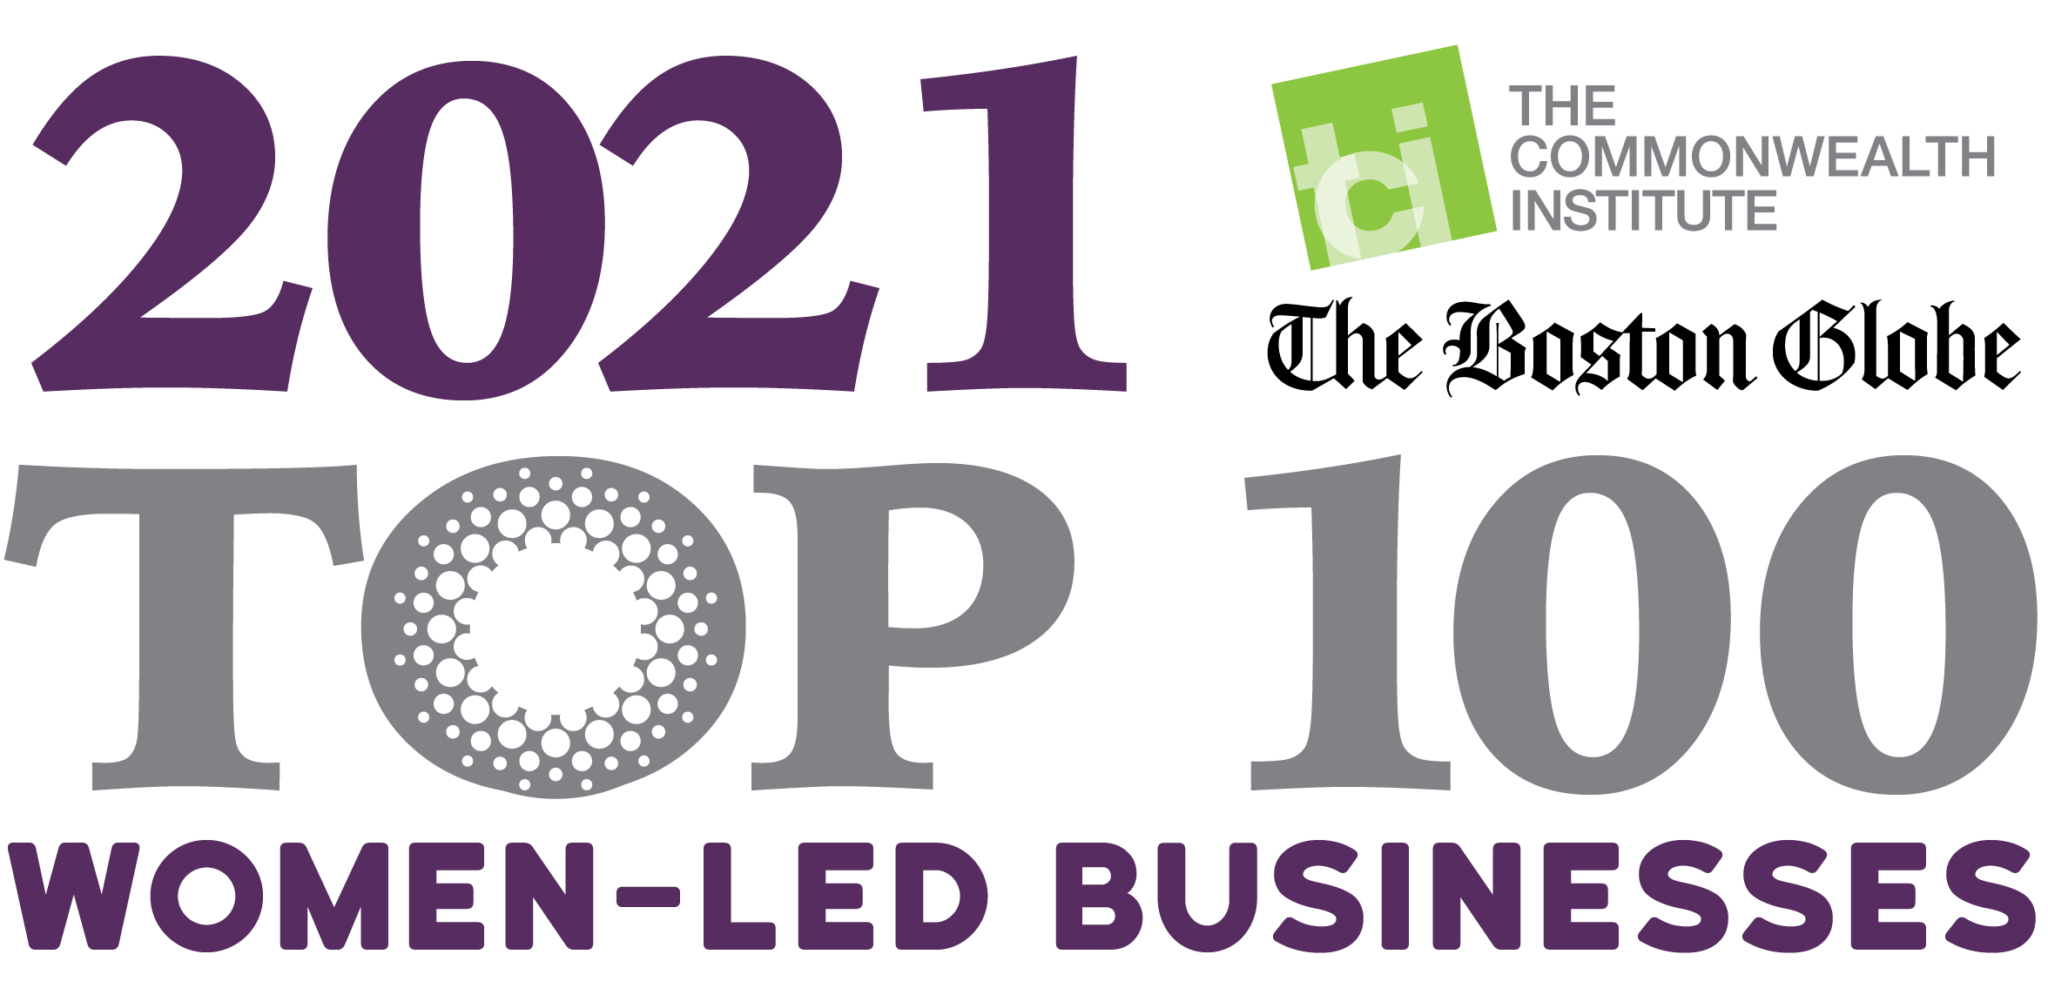 2021 Top 100 Women Led Businesses TCI and Globe Logo